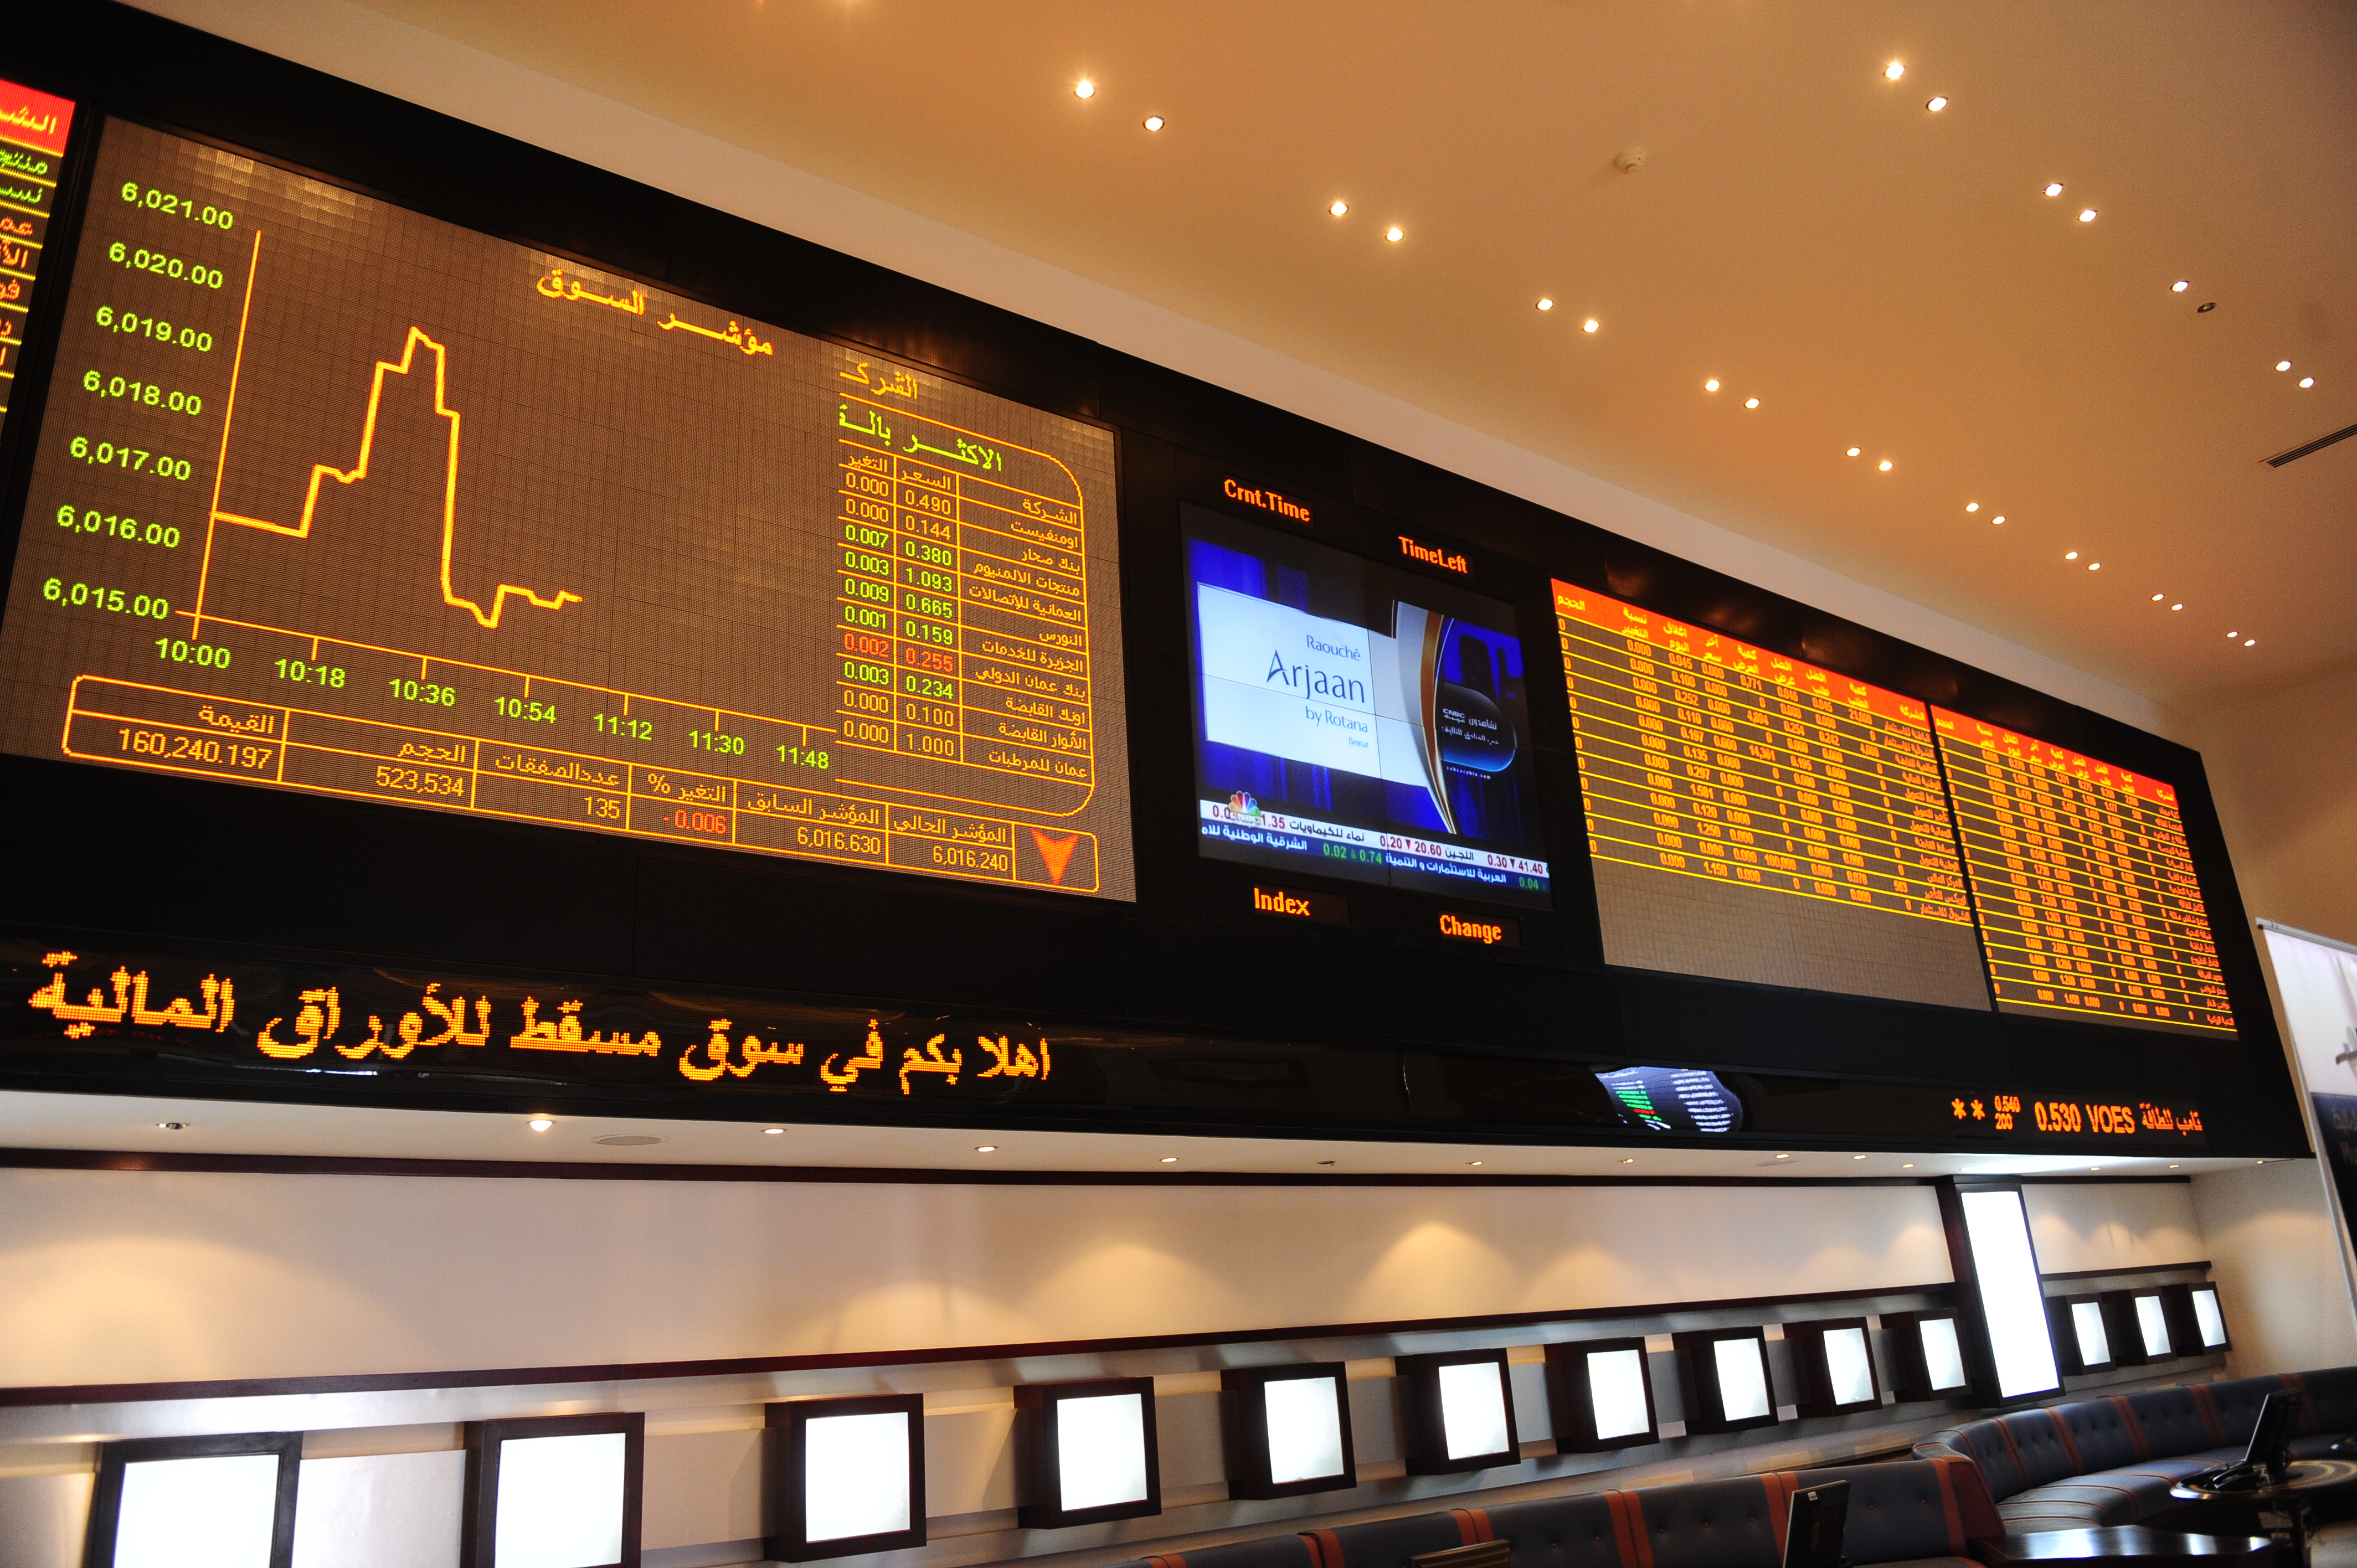 Oman share index falls near 14-month low